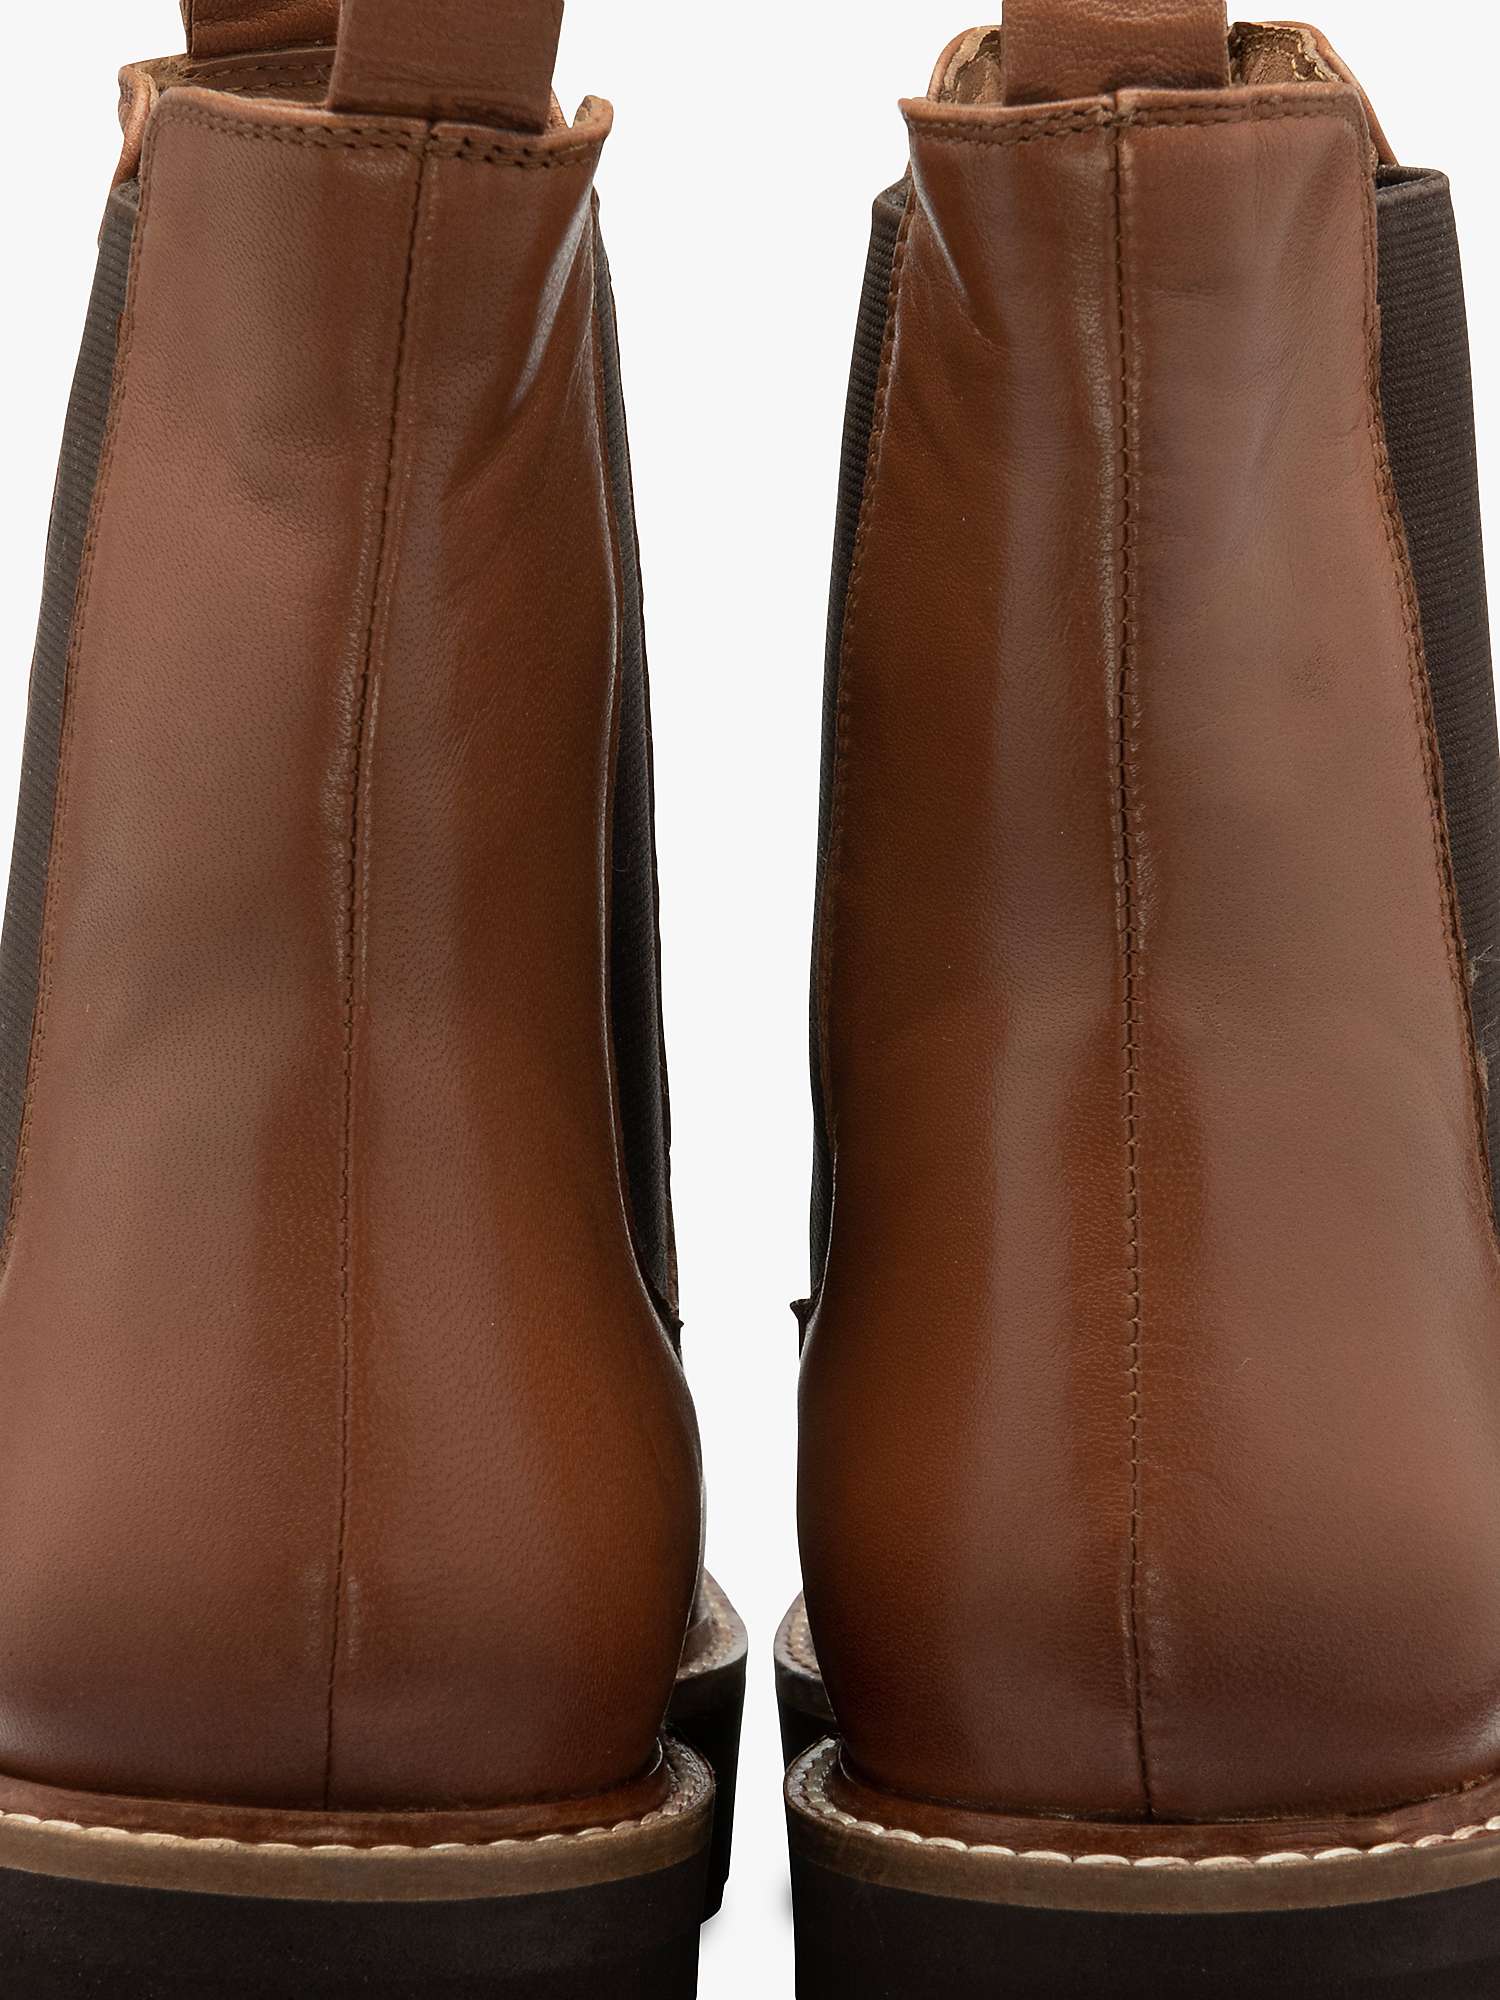 Ravel Women's Abbey Leather Ankle Boots, Tan at John Lewis & Partners